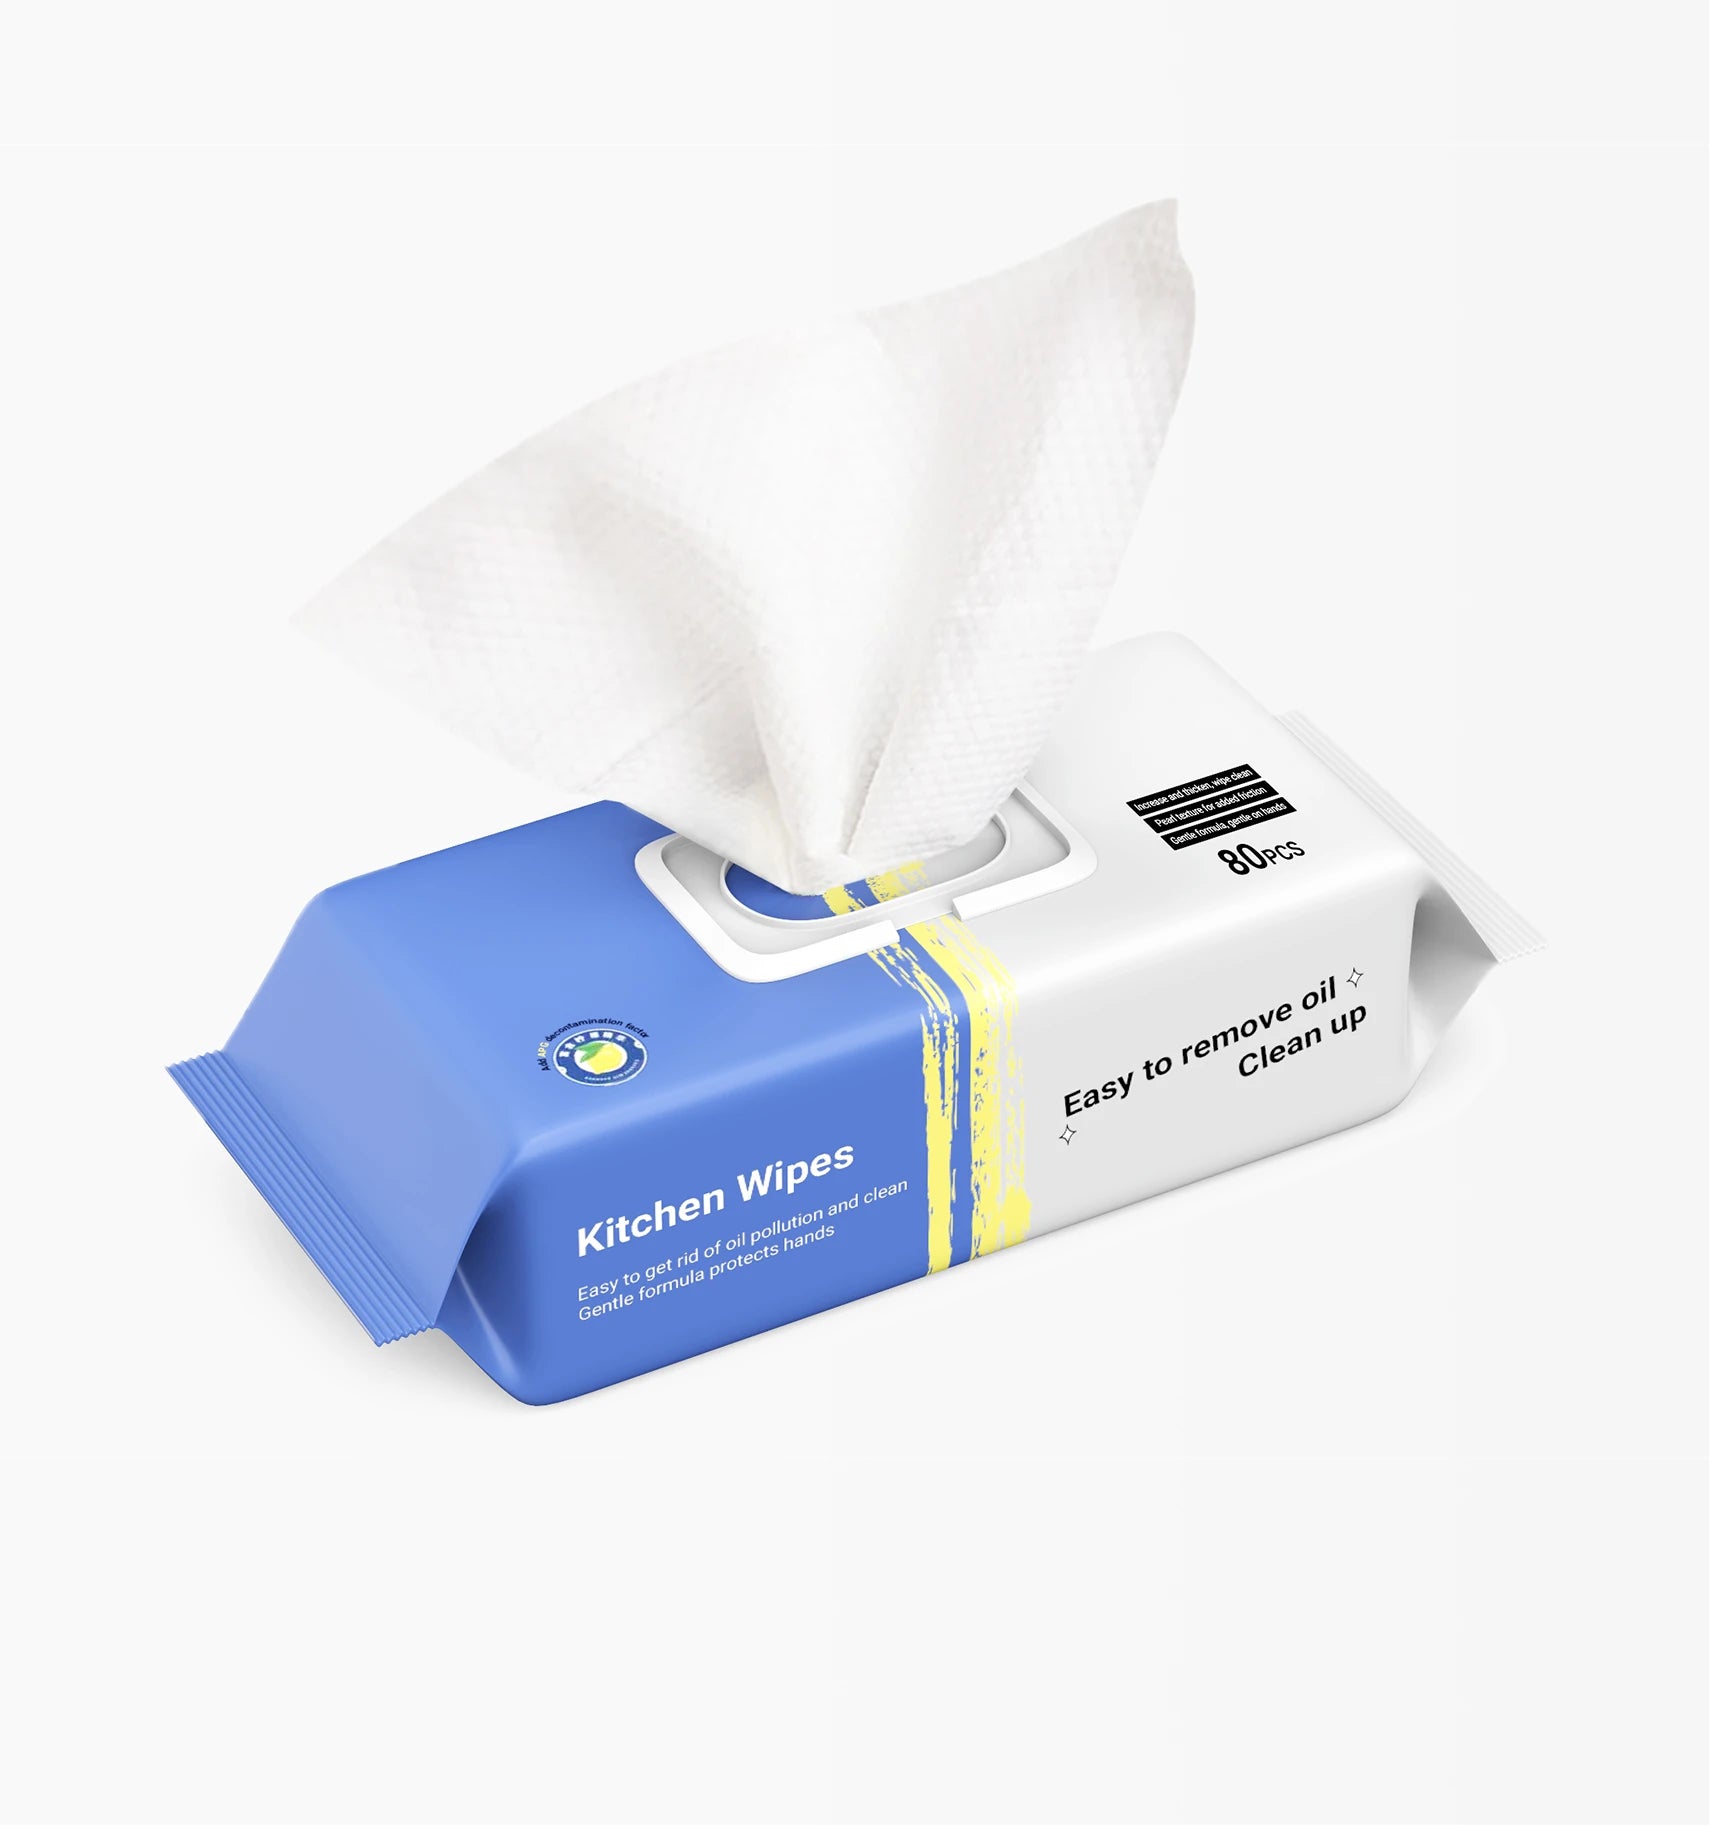 Packaging of blue and white kitchen wipes with one wipe partially pulled out, emphasizing ease of oil removal.